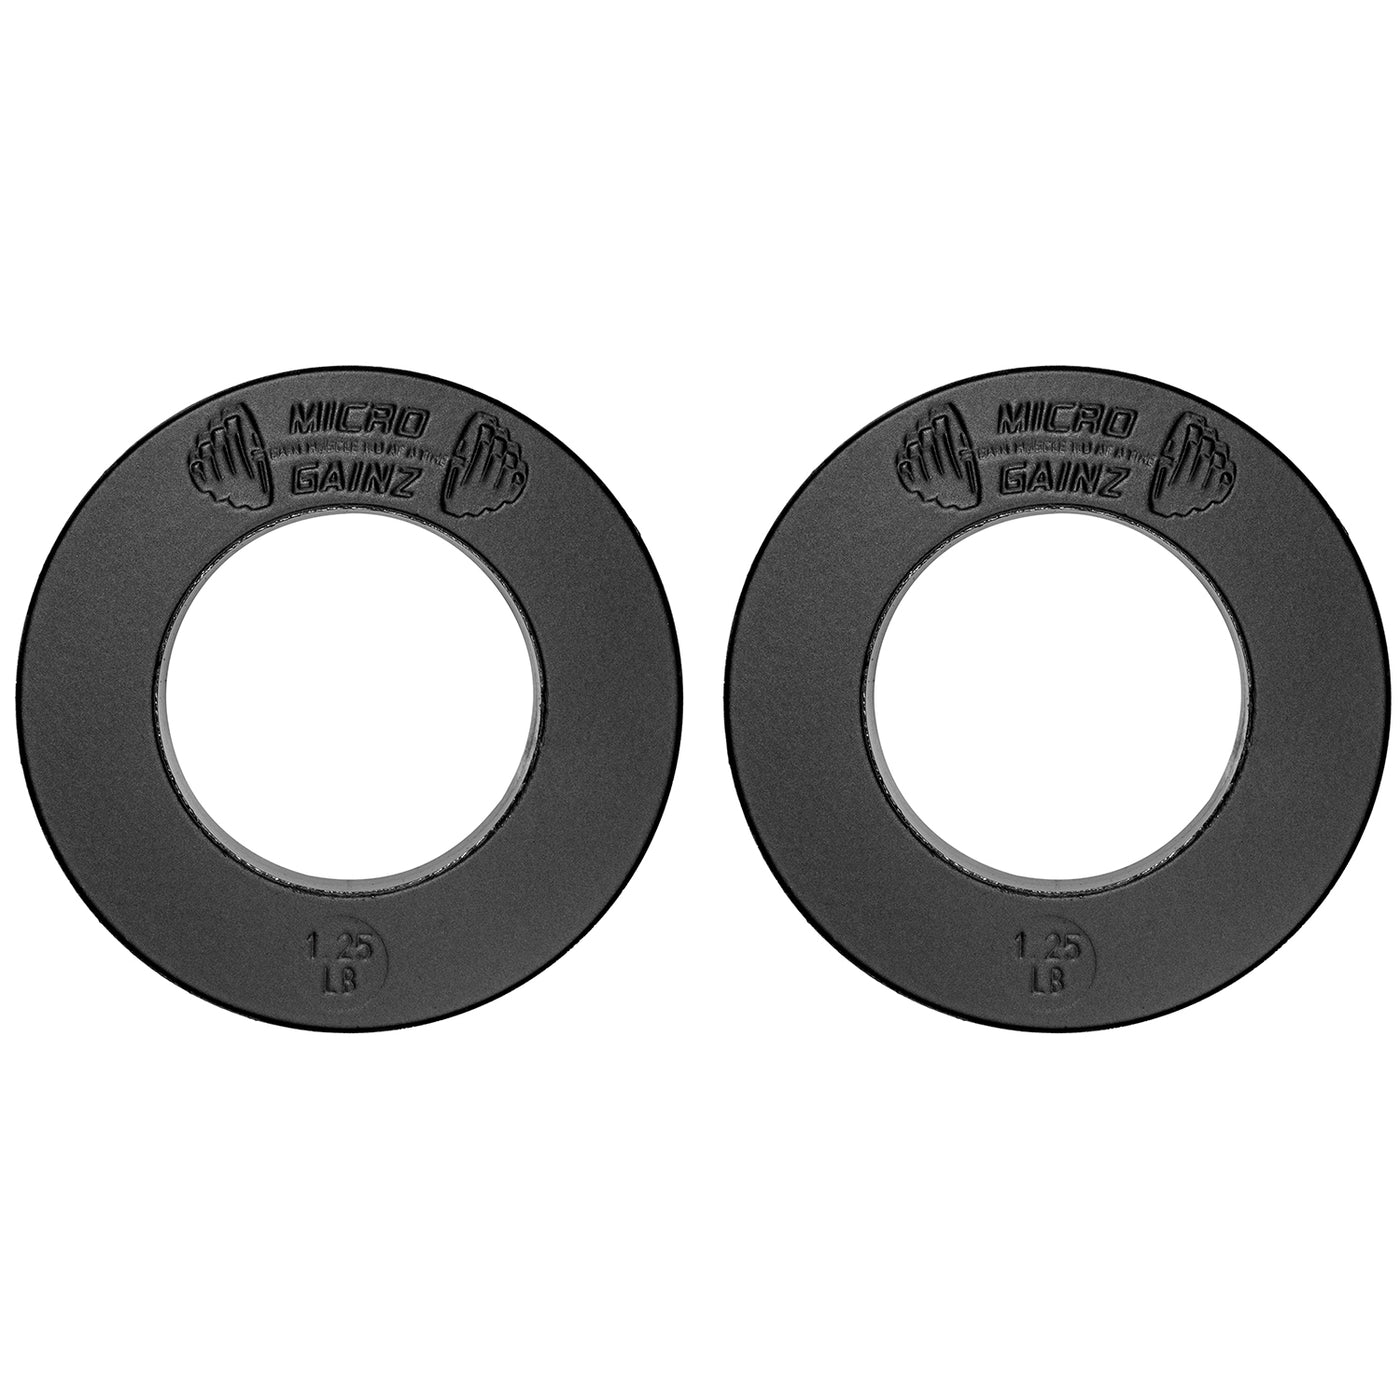 Micro Gainz Olympic Size Fractional Weight Plates Pair of 1.25LB Plates